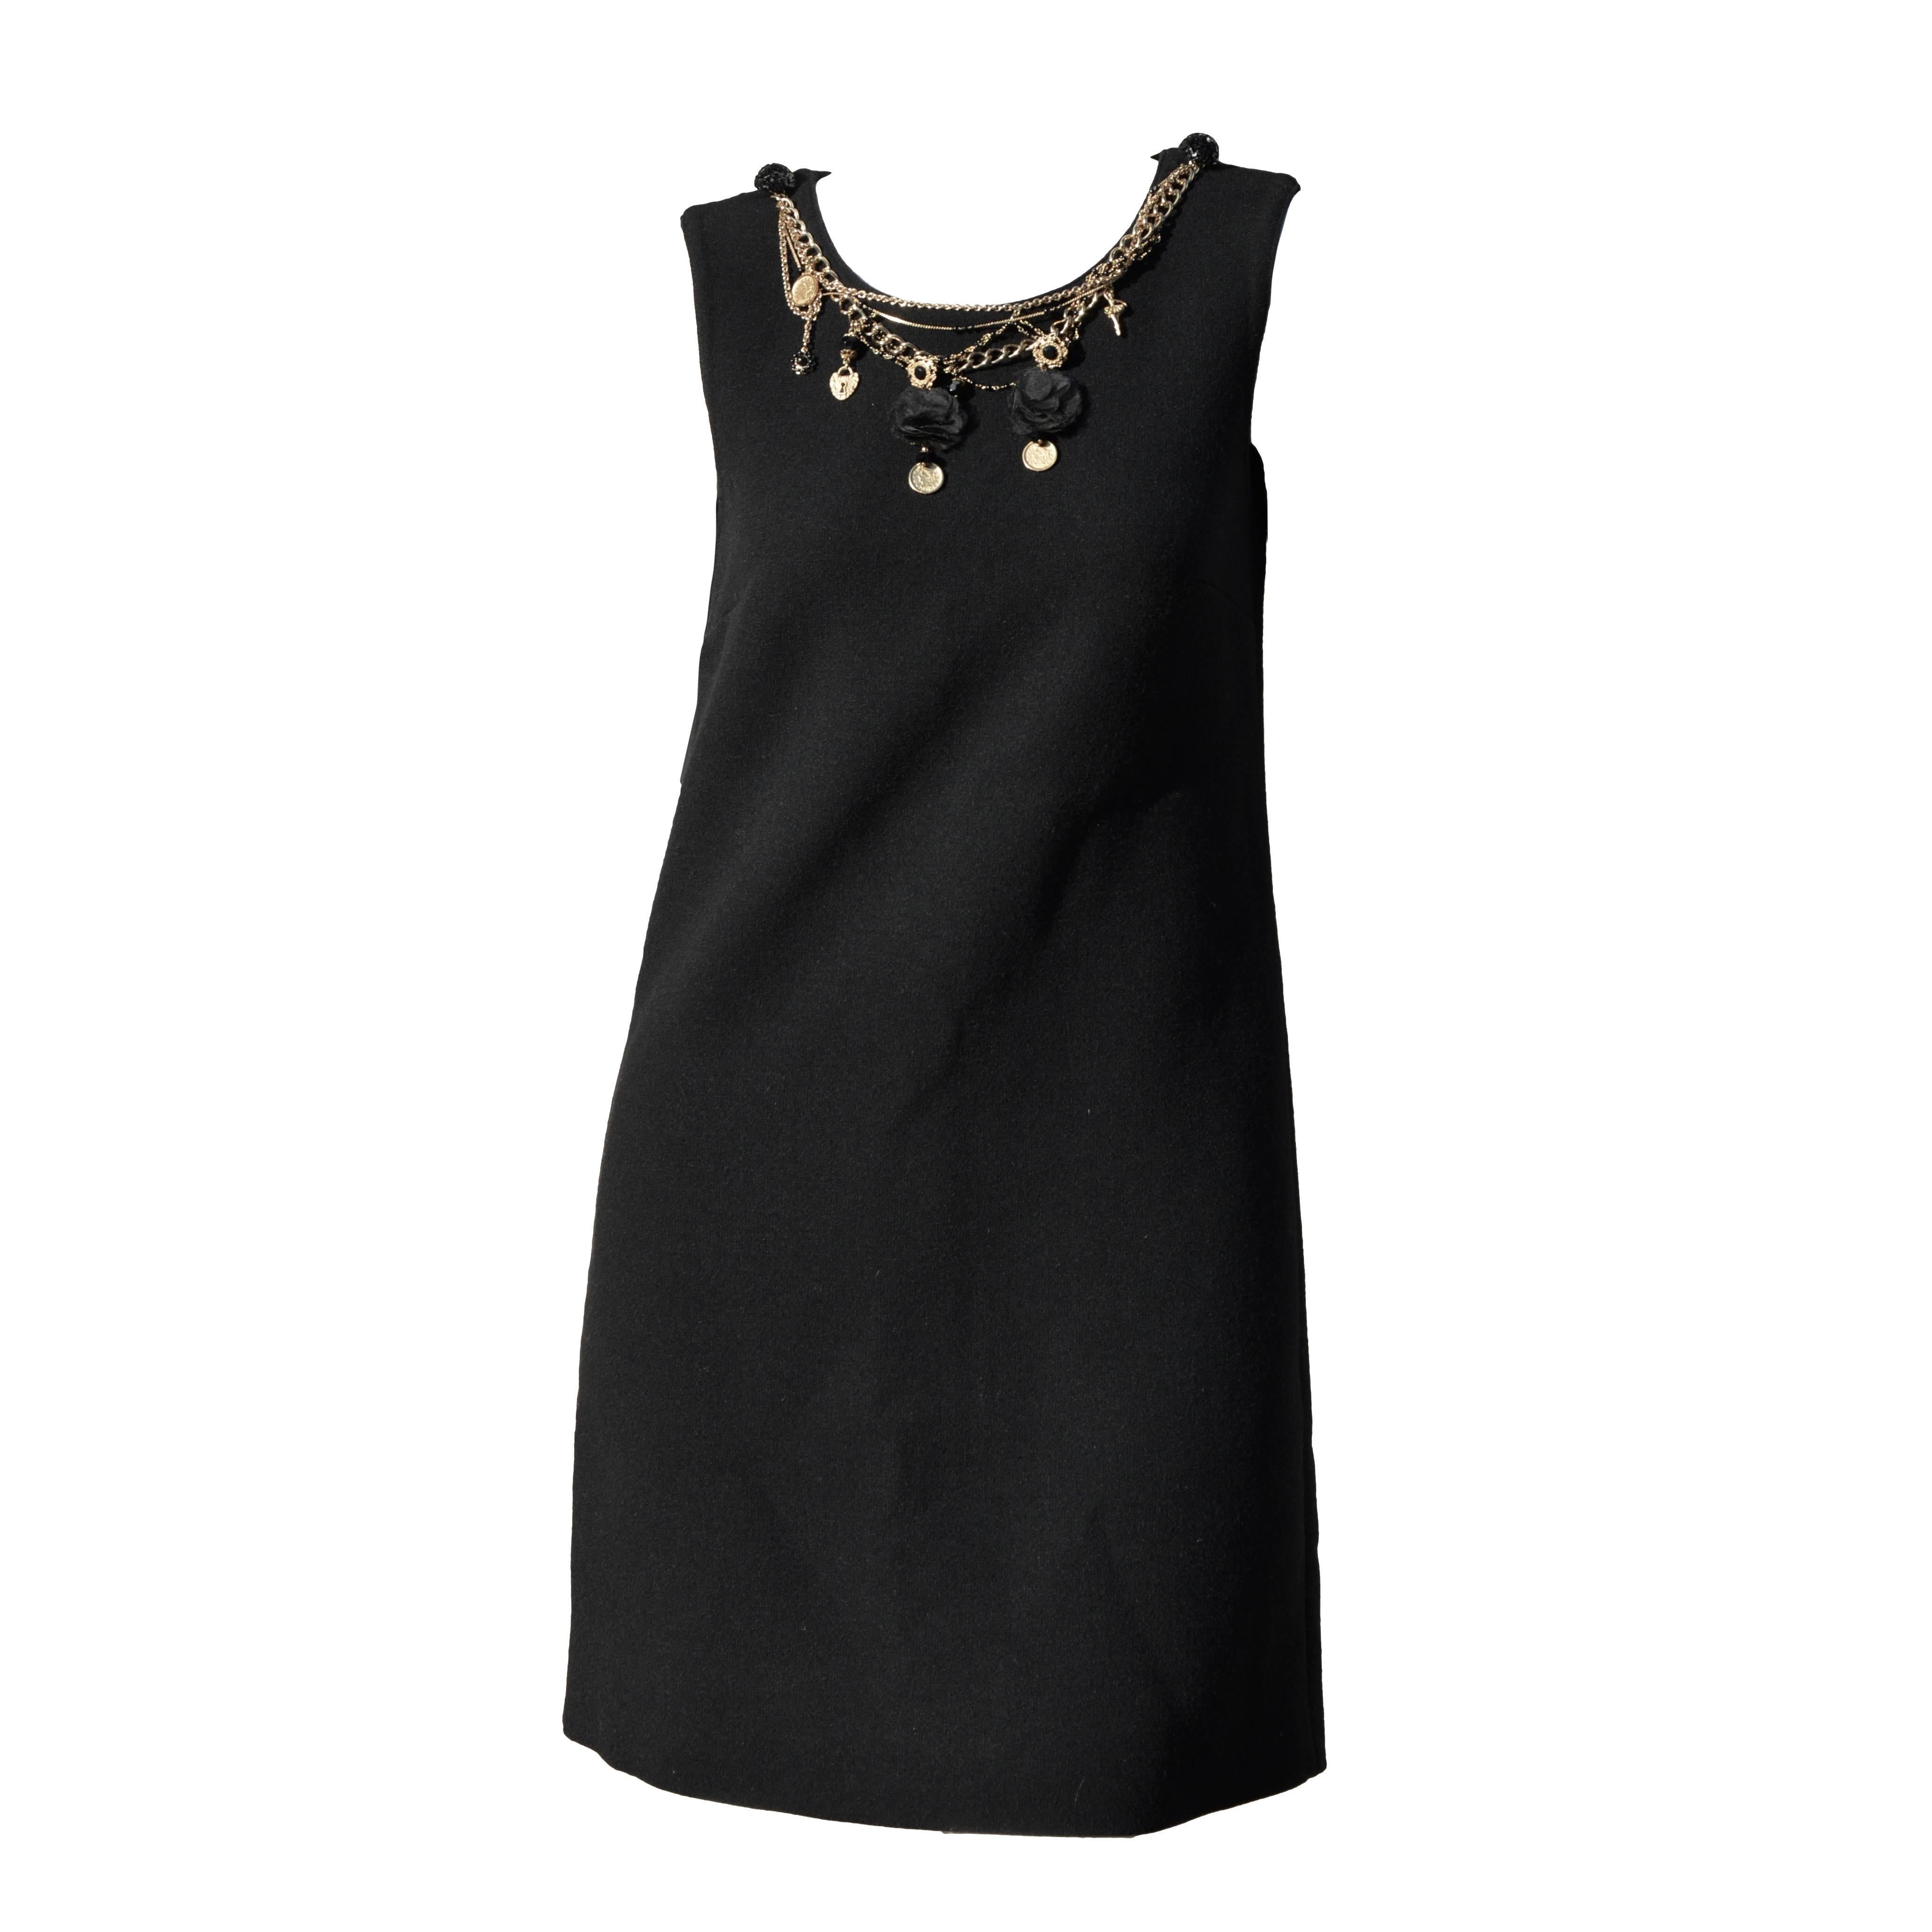 Timeless Dolce & Gabbana "little black dress" with Multiple Charms For Sale